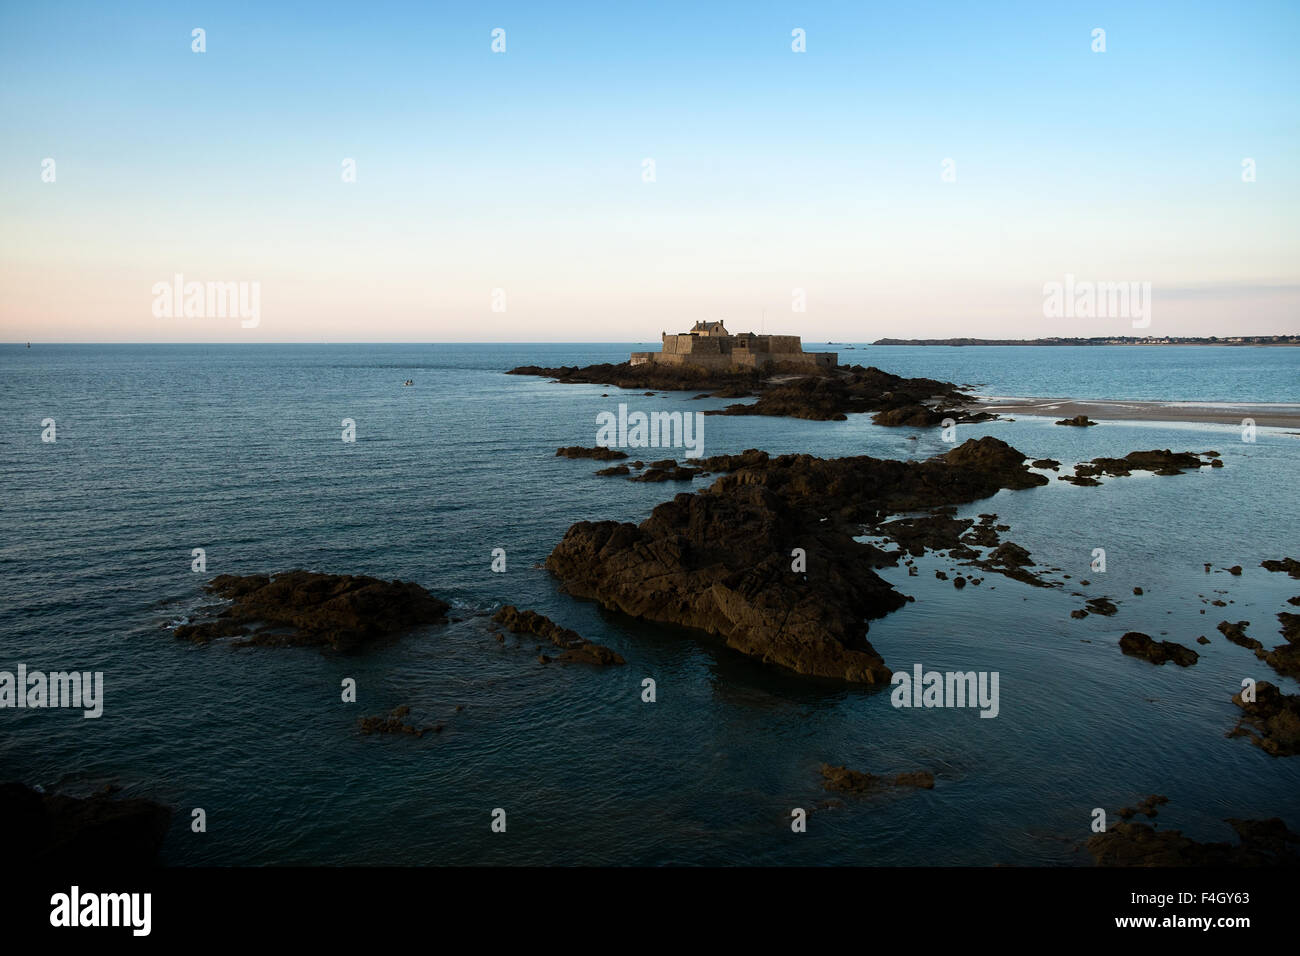 Islands off the coast of St Malo, France Stock Photo